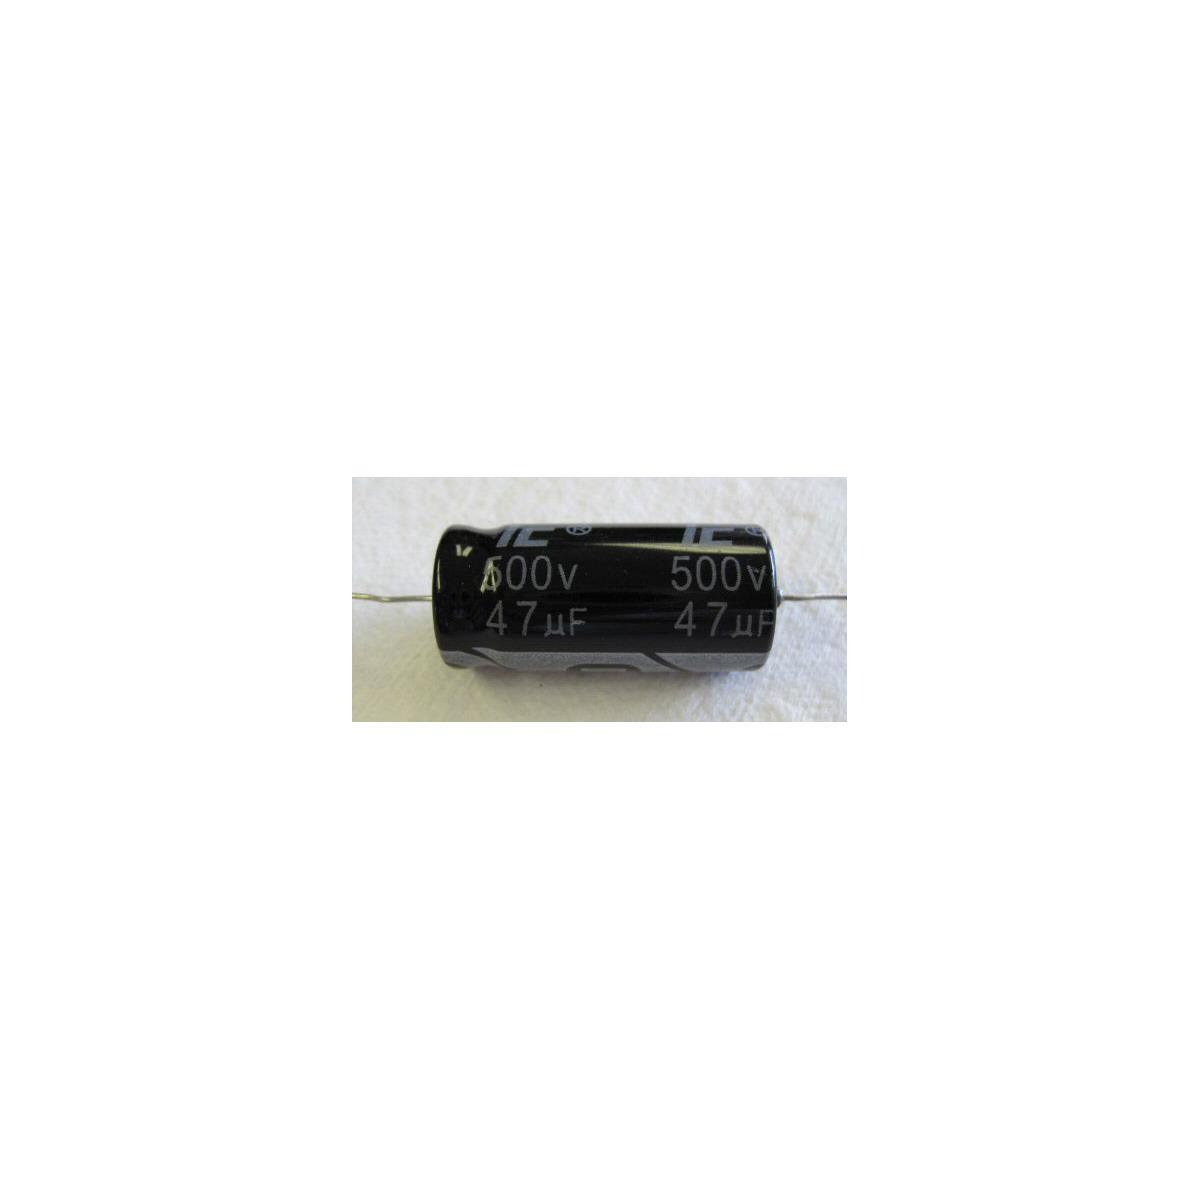 Image of Fender AE AXIAL Electrolytic Capacitor 47uF 500V +50%-10% for Tube Amplifiers